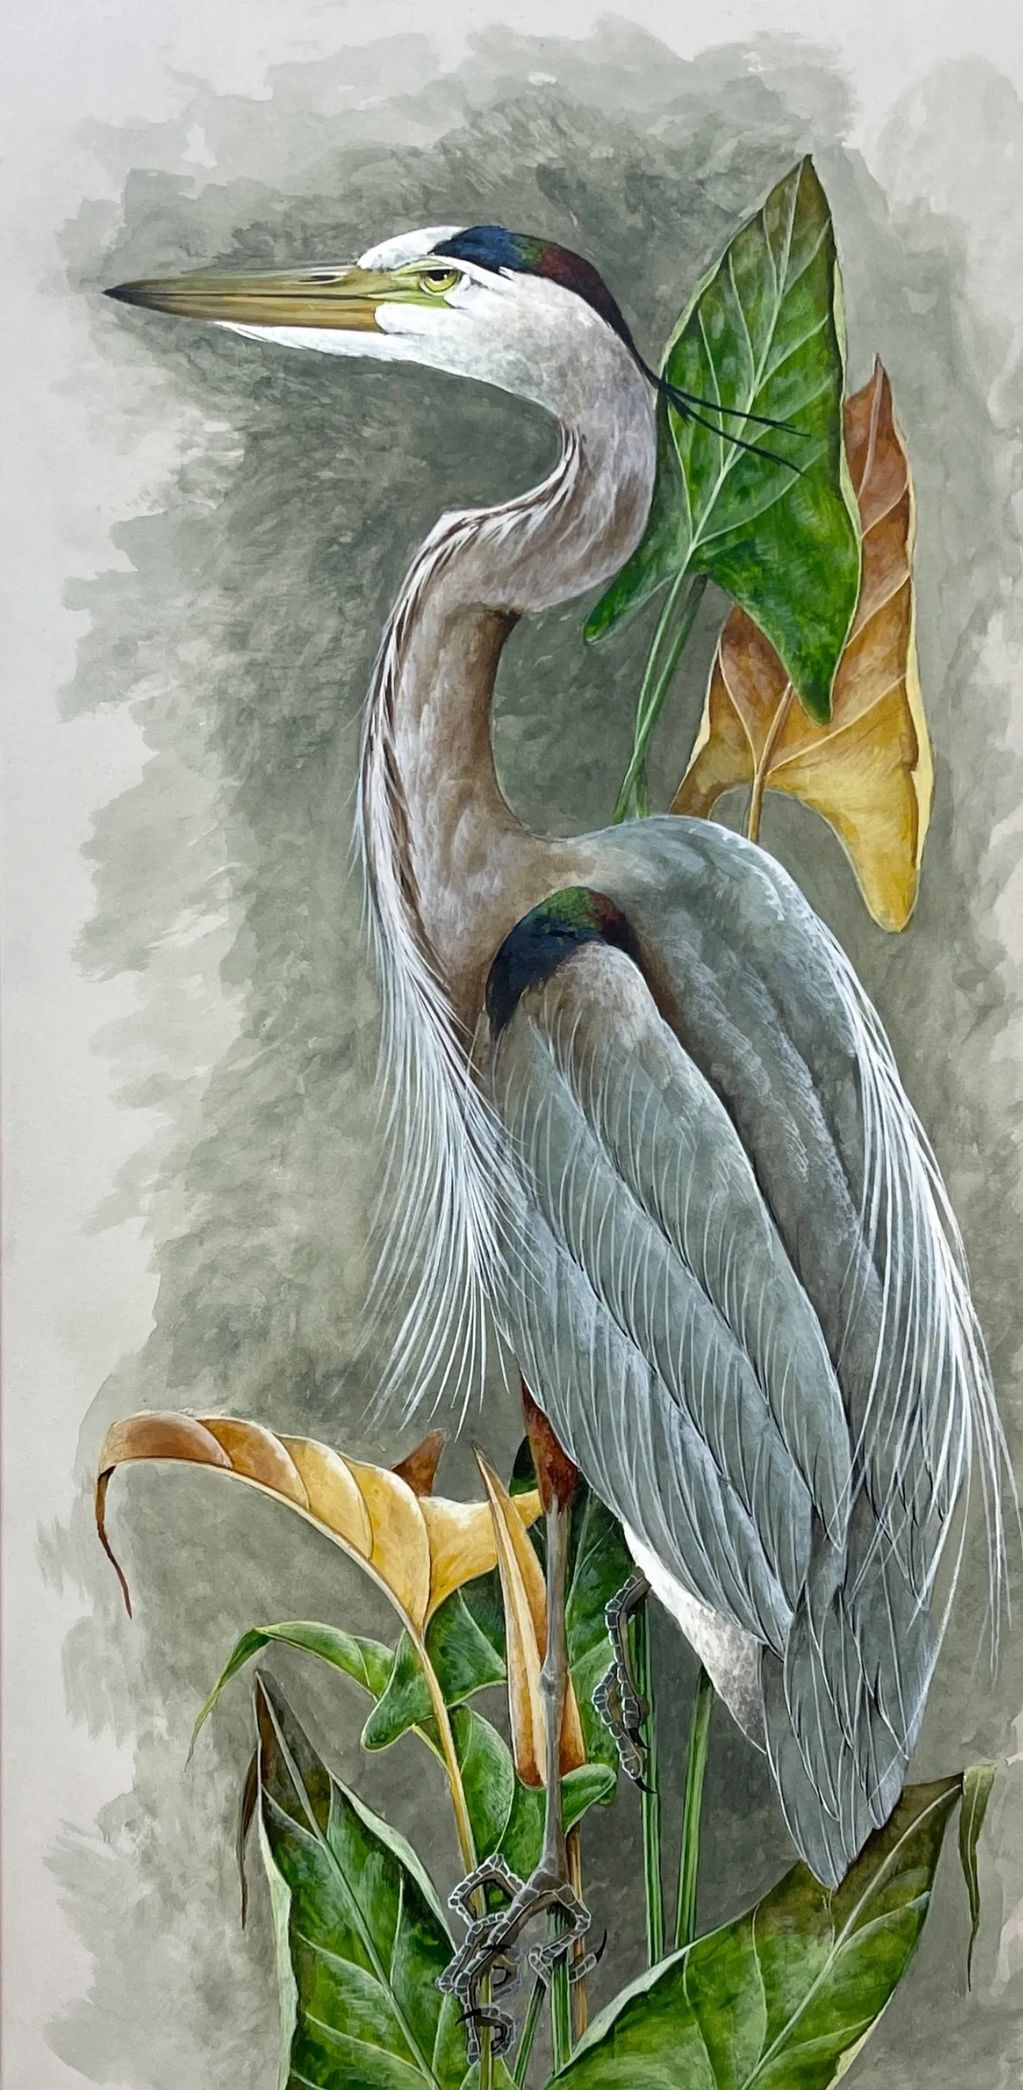 Blue Gentleman
Great Blue Heron
Giclee  Edition 100 S&N
Image Size 40x21
$250
